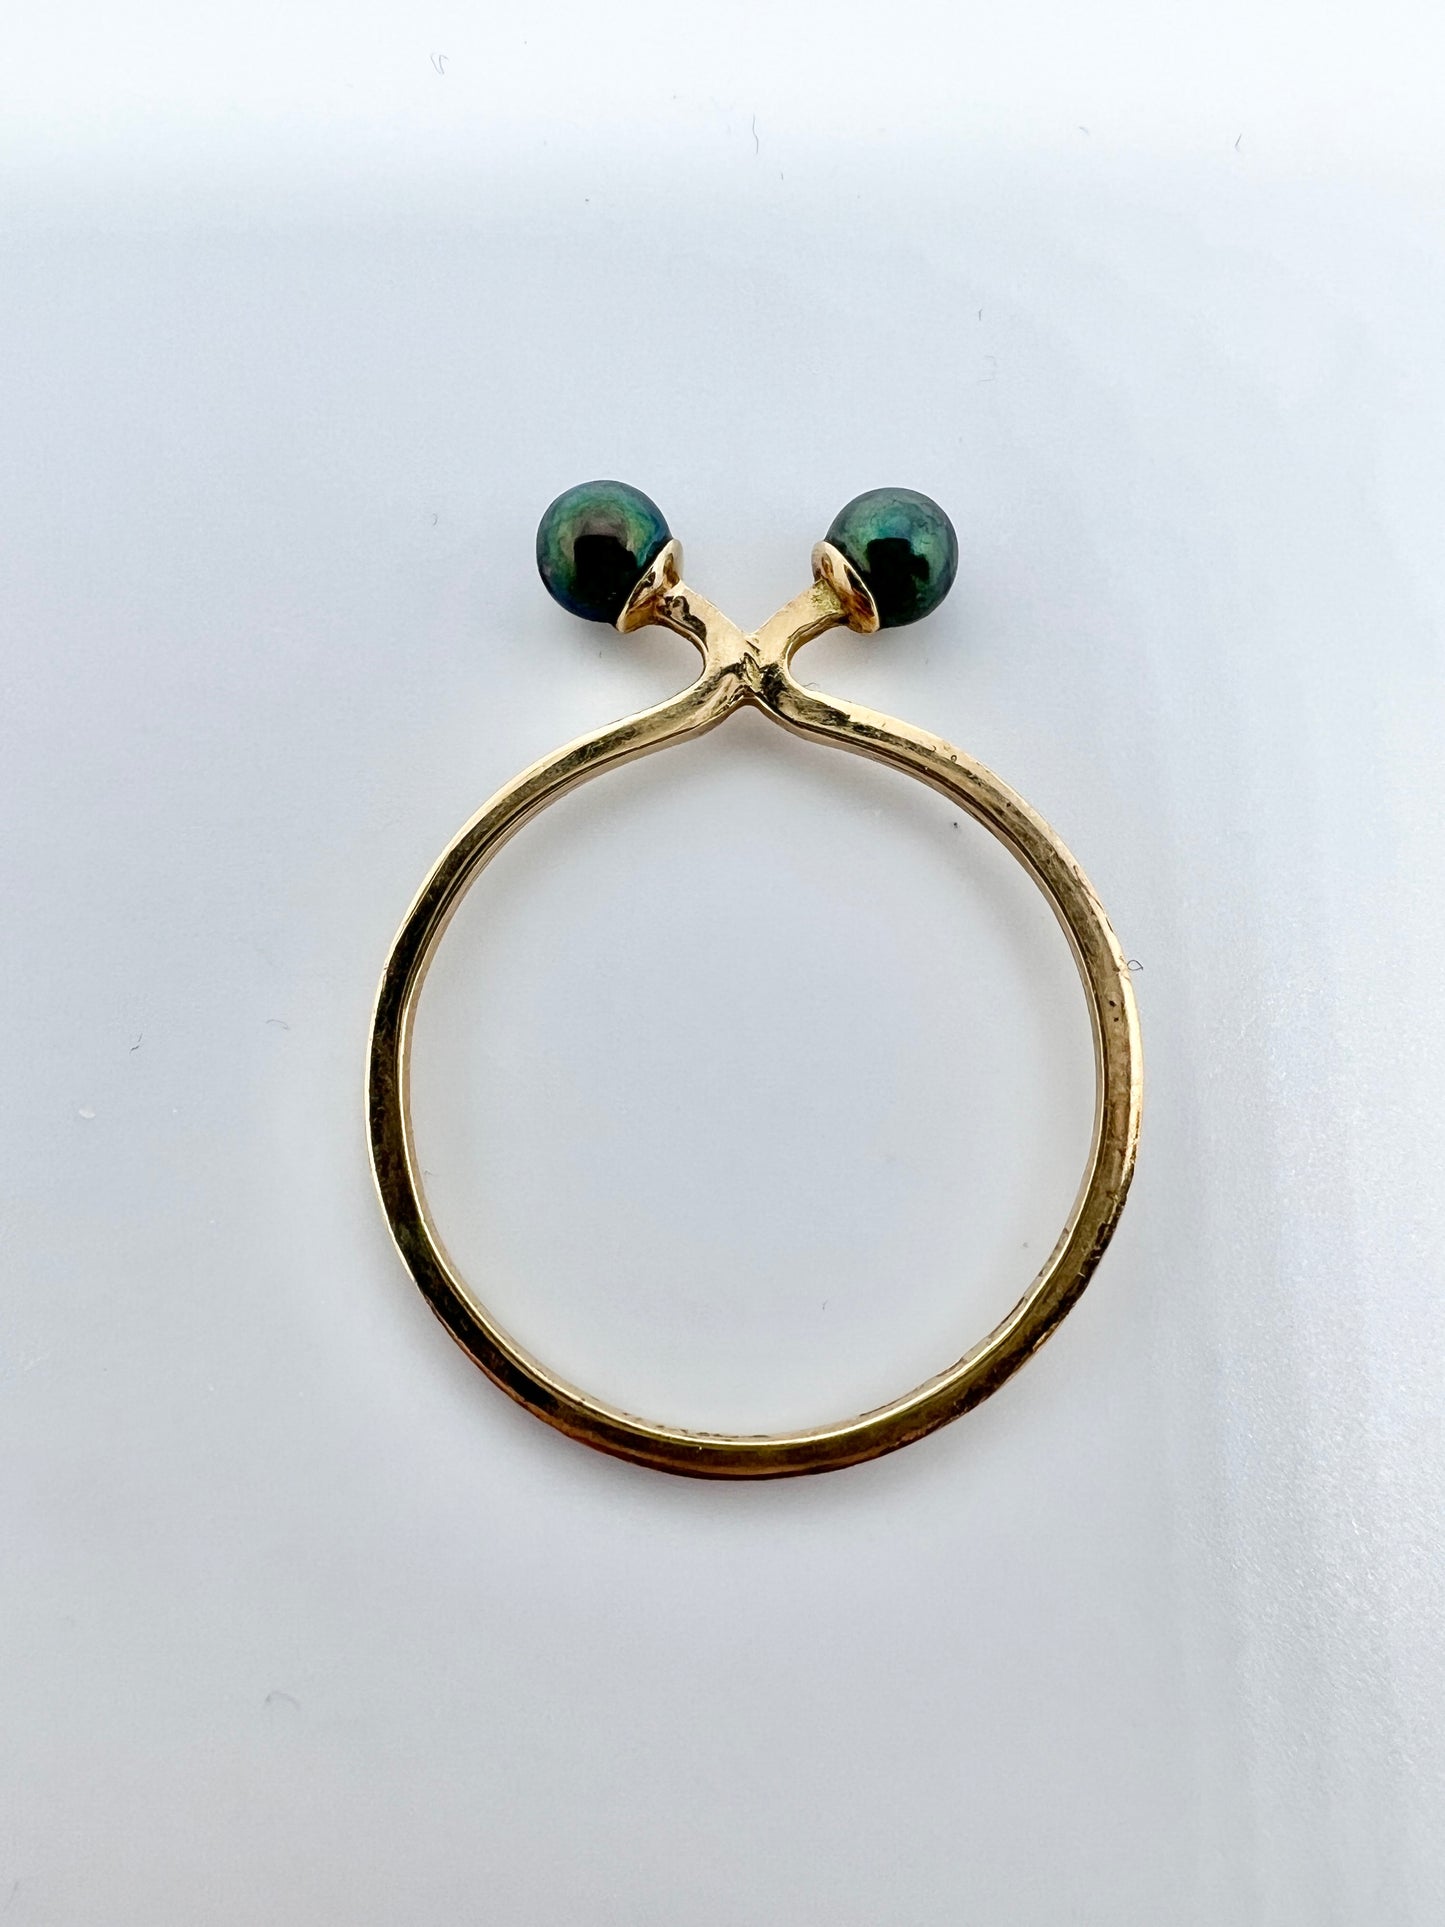 Theresia Hvorslev, Sweden 1988. Vintage 18k Gold Cultured Pearl Stack Ring. "The Tale Of The Ring"